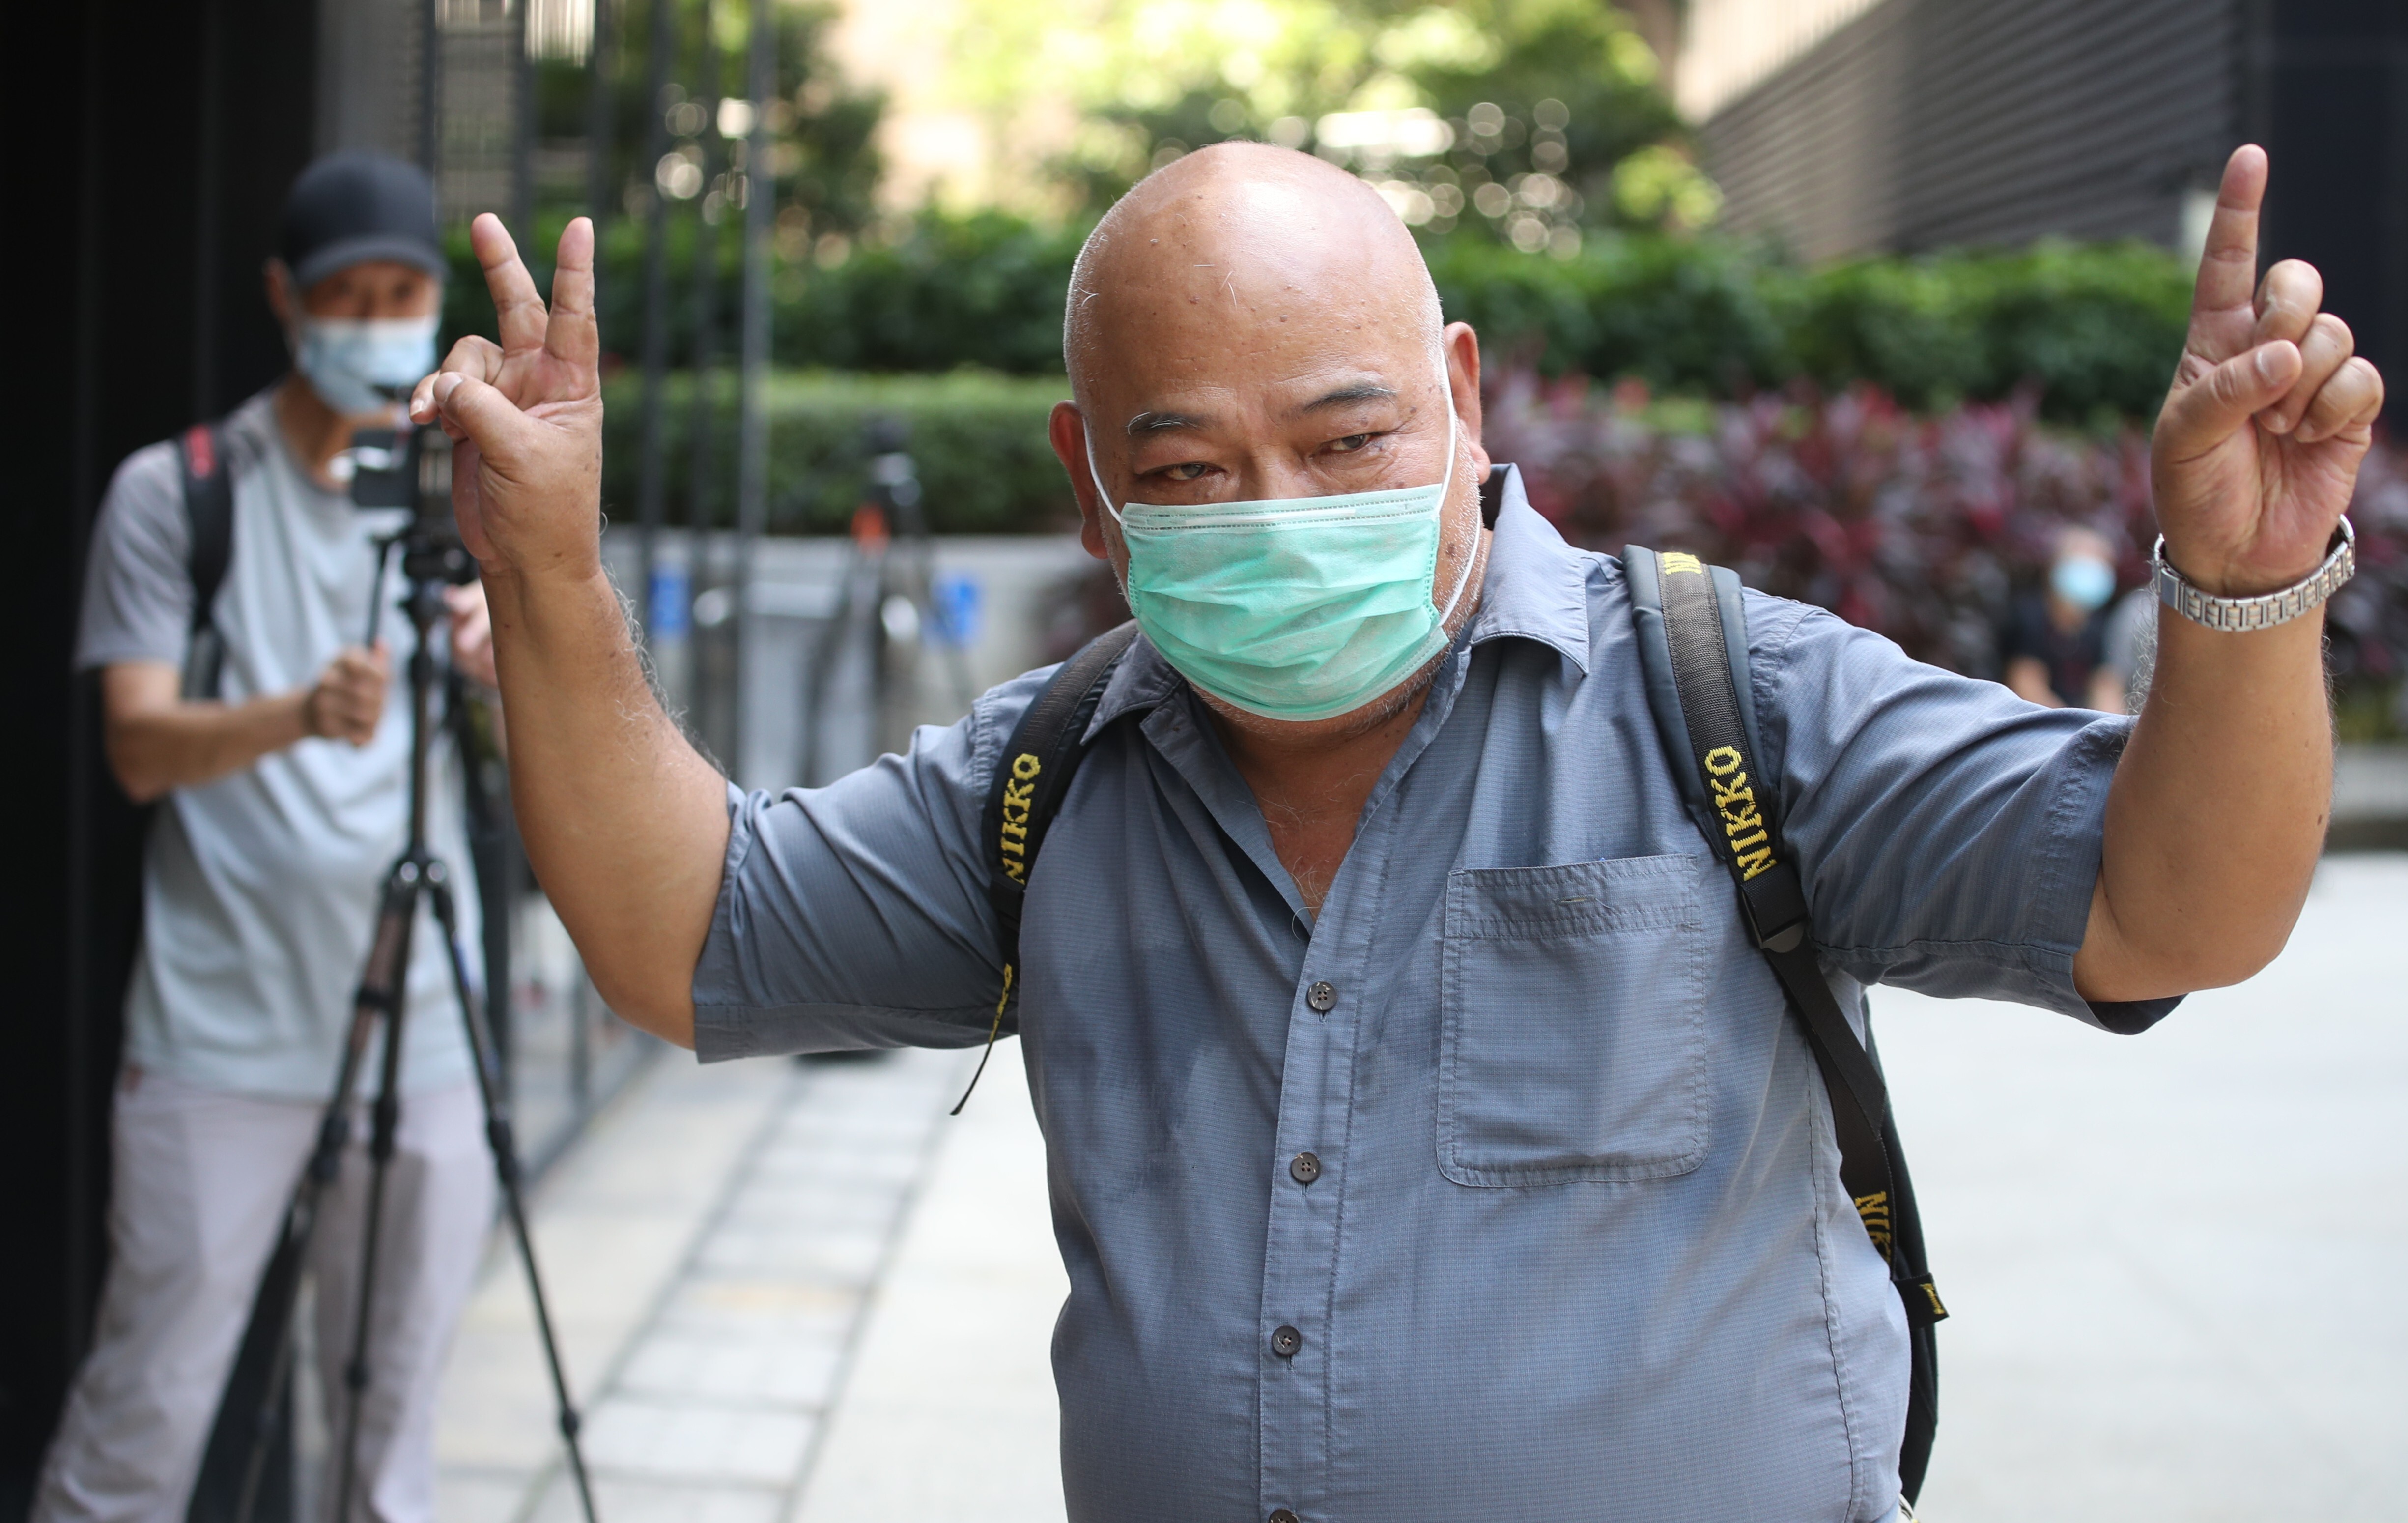 District councillor Tsang Kin-shing at the District Court in Wan Chai on Tuesday. Photo: Edmond So